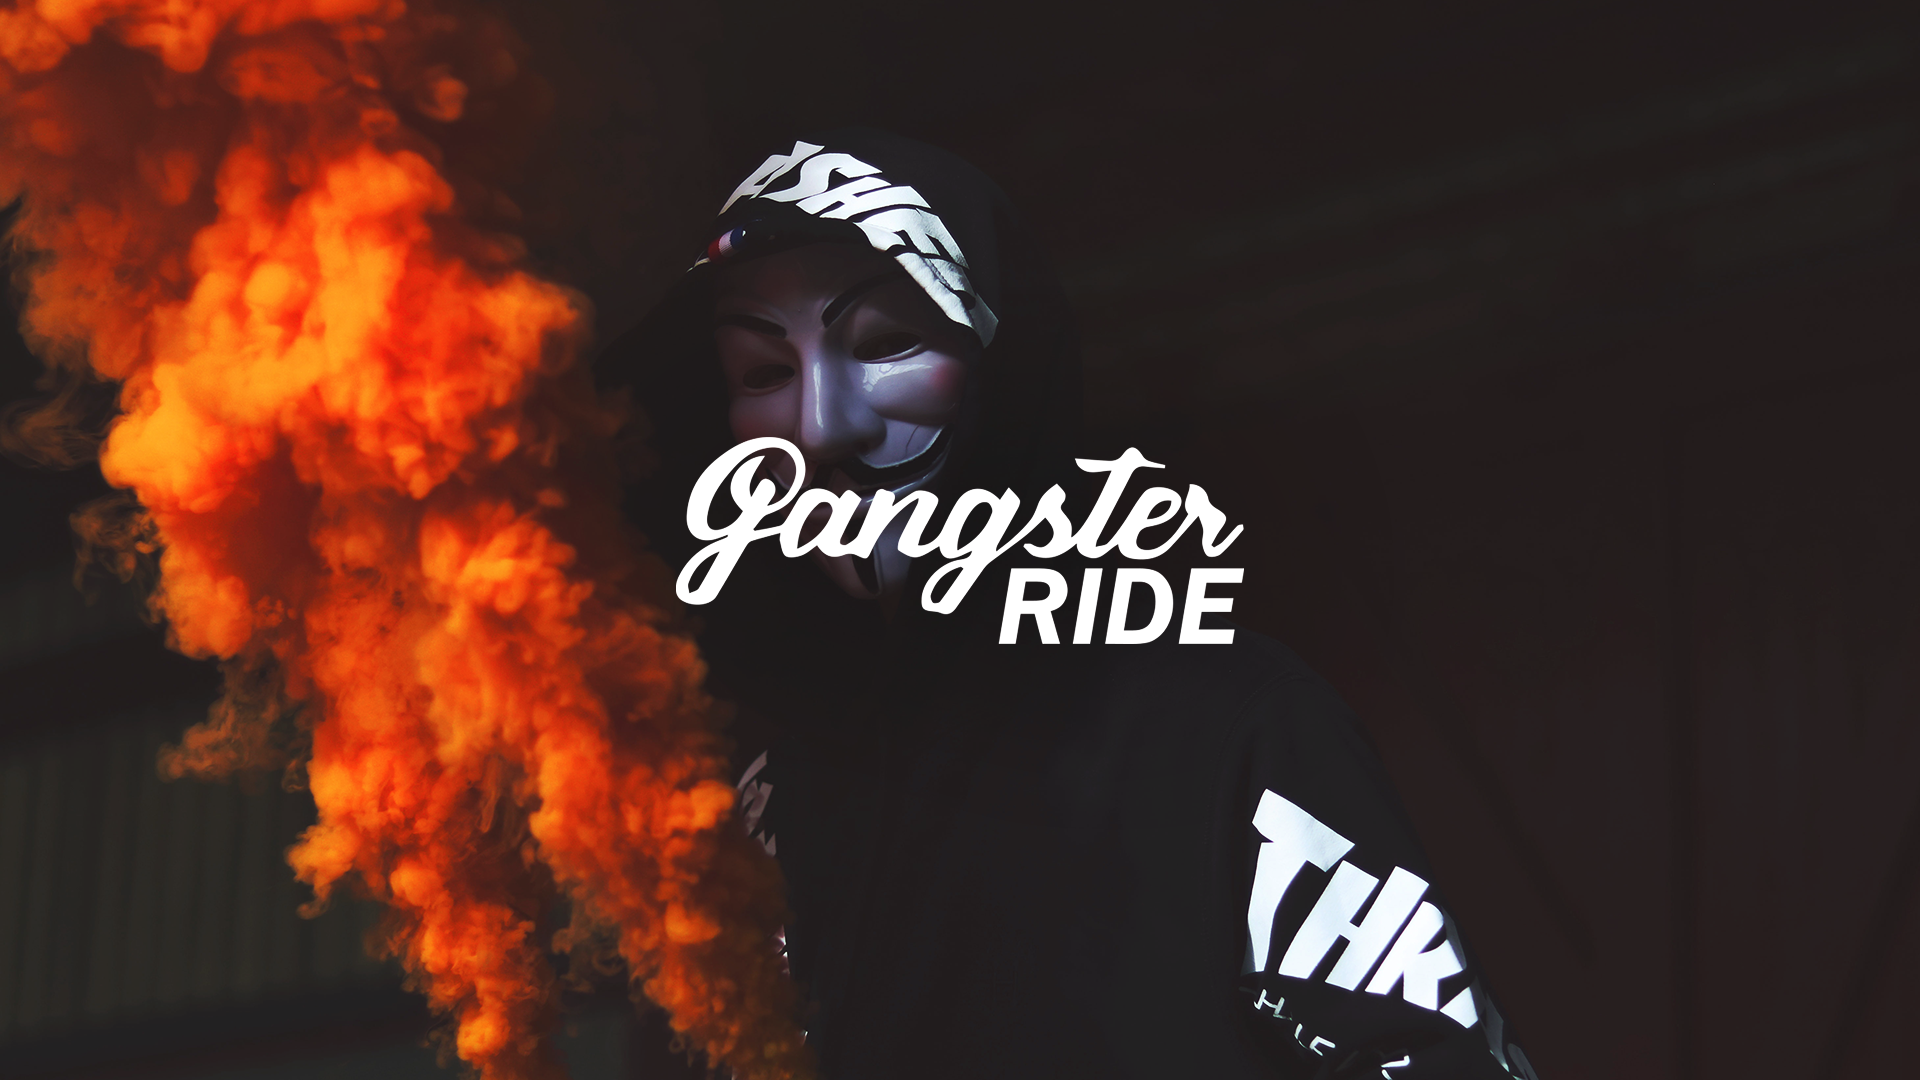 Smoke Smoking Police Lowrider BMX Mask Gas Masks Car Gangsters Gangster Colorful YouTube 1920x1080